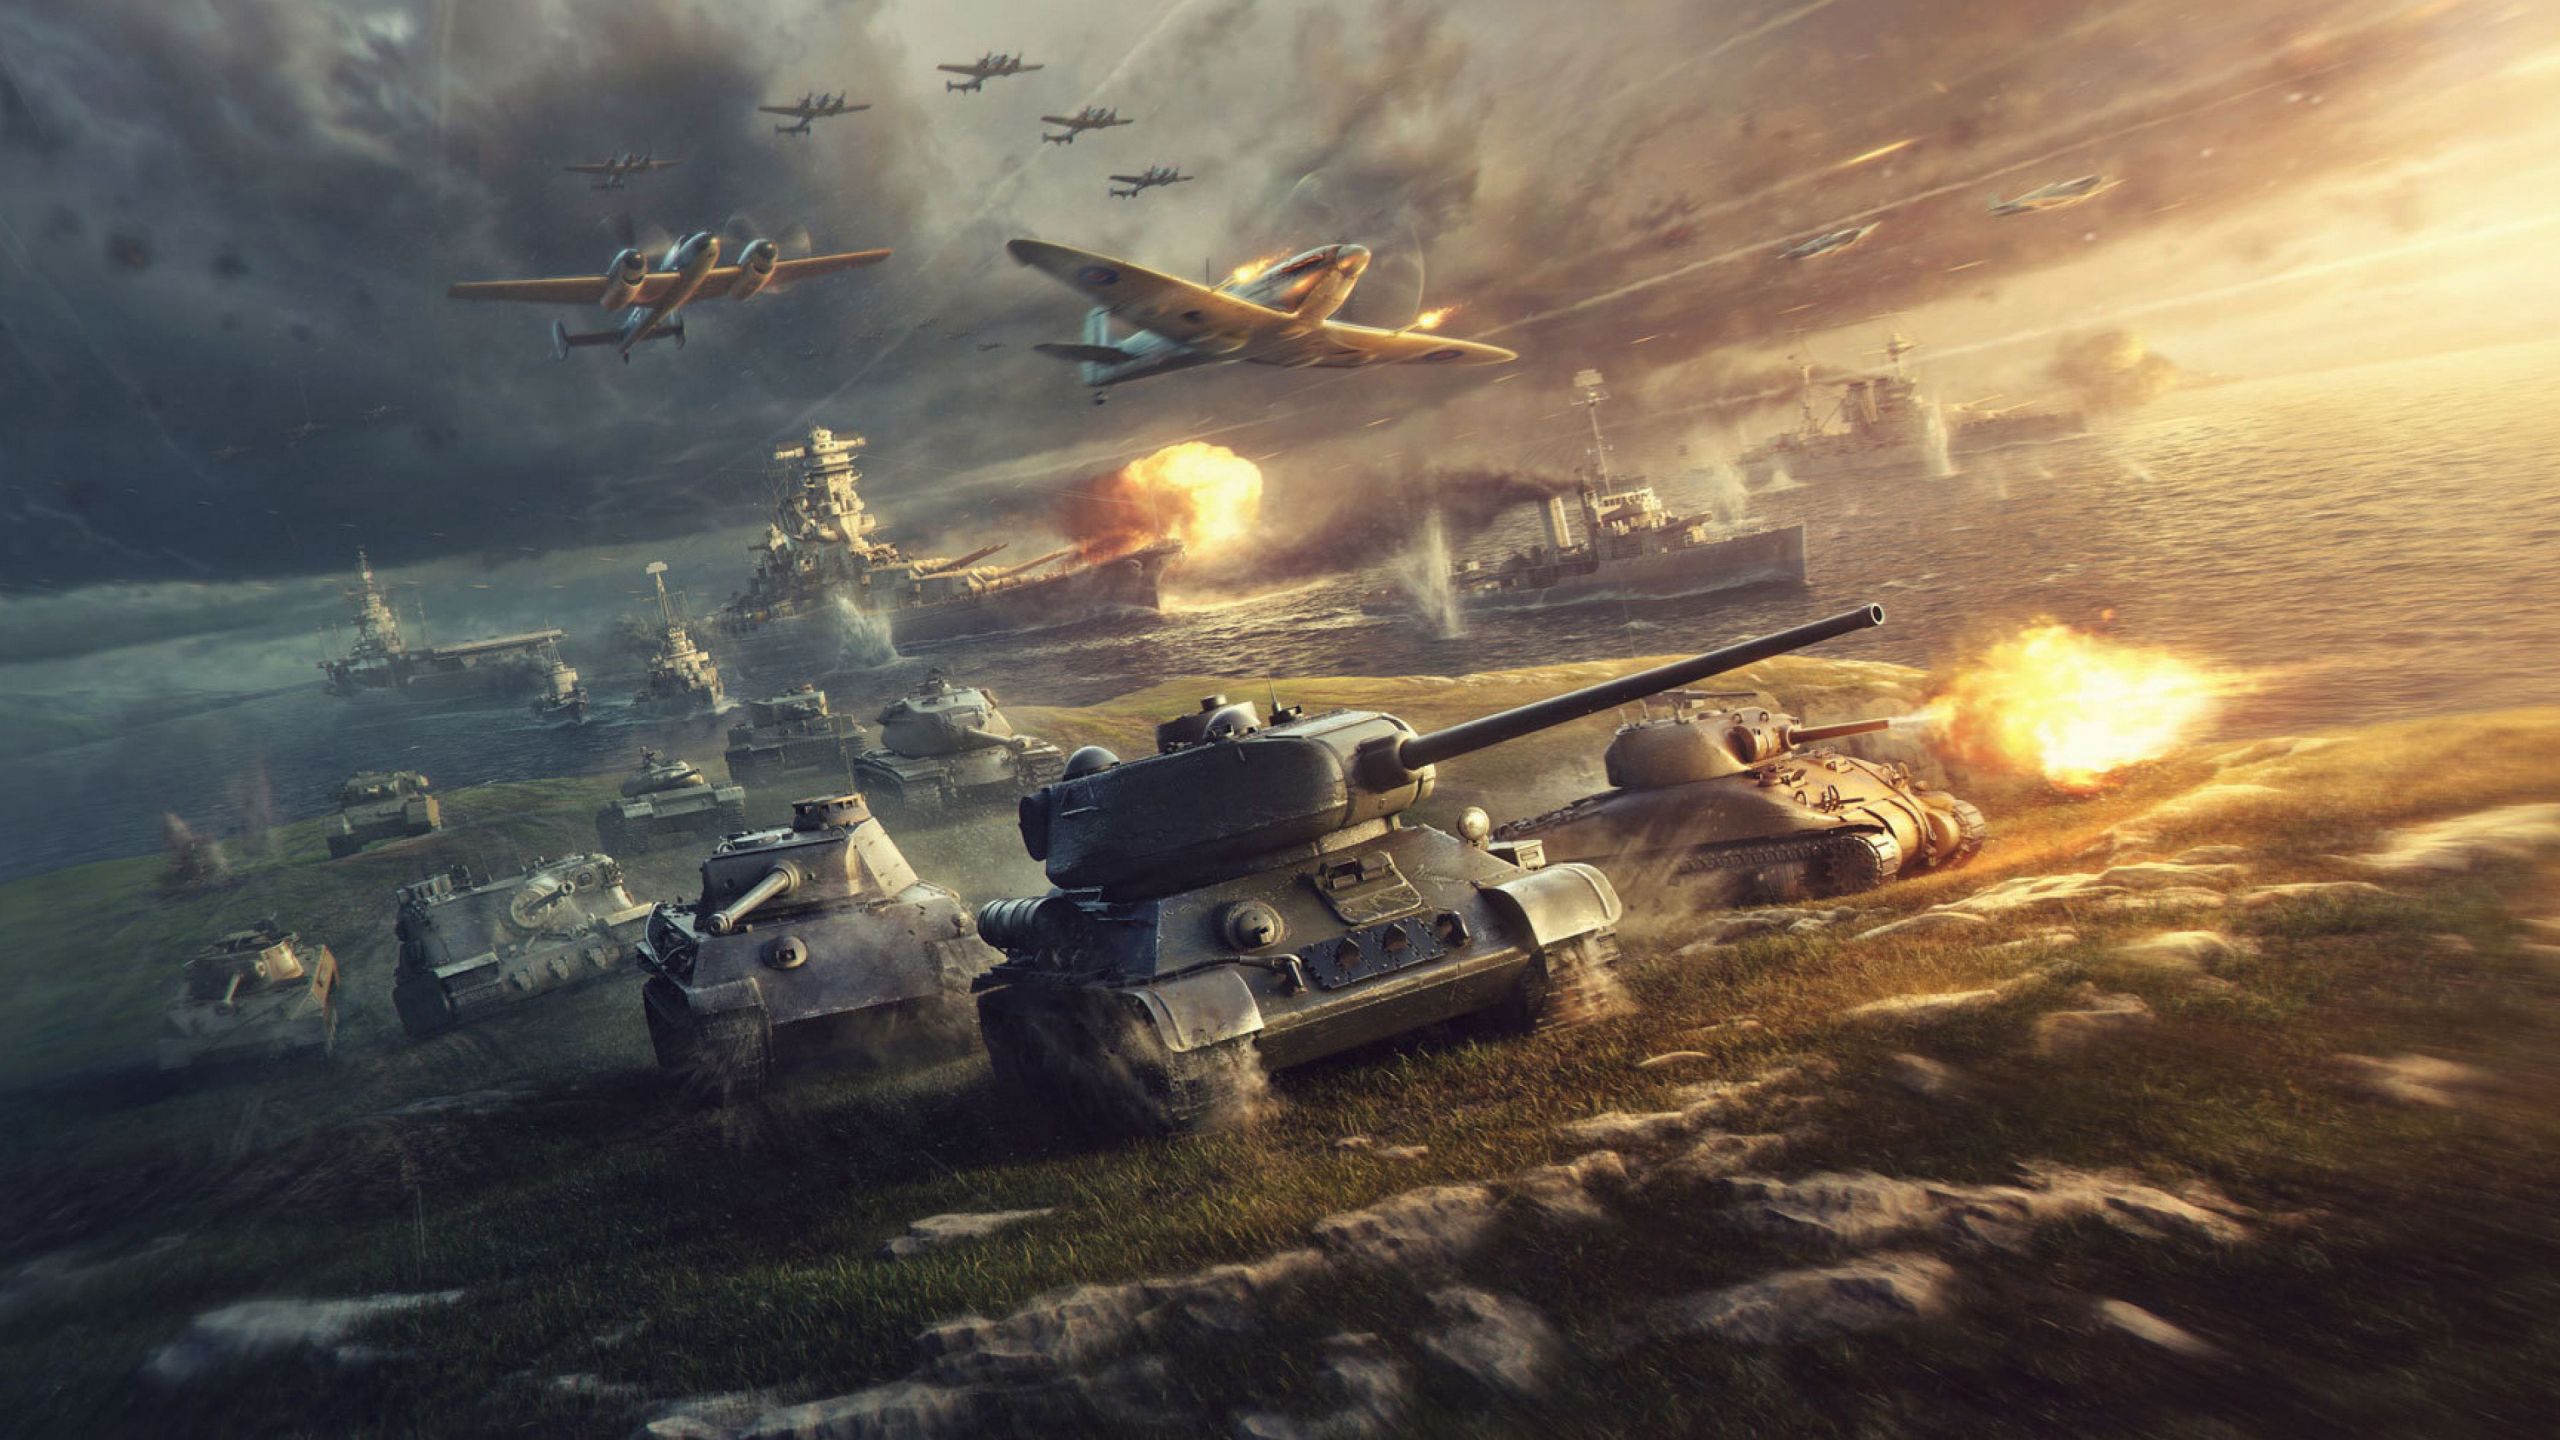 Desktop Wallpaper World Of Tanks, Tanks And Fighter Aircraft, Online Game, 4k, HD Image, Picture, Background, Qpl9vr